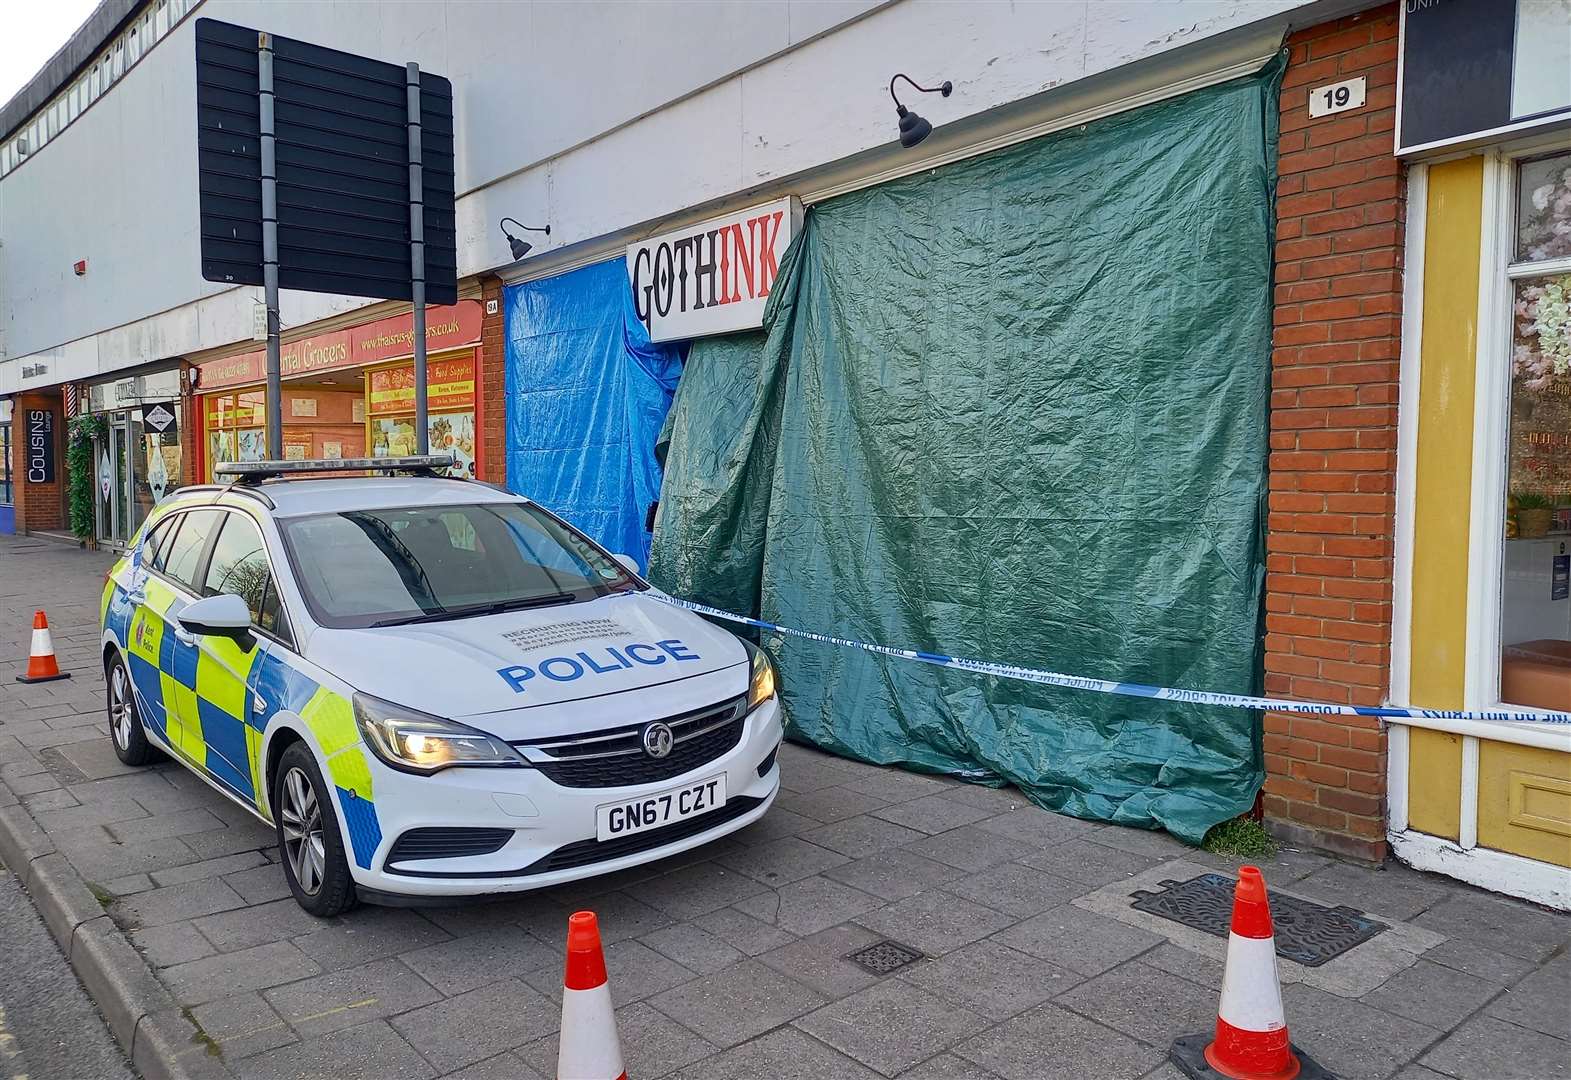 GothInk Studio in Lower Bridge Street, Canterbury, was screened by tarpaulins following the incident